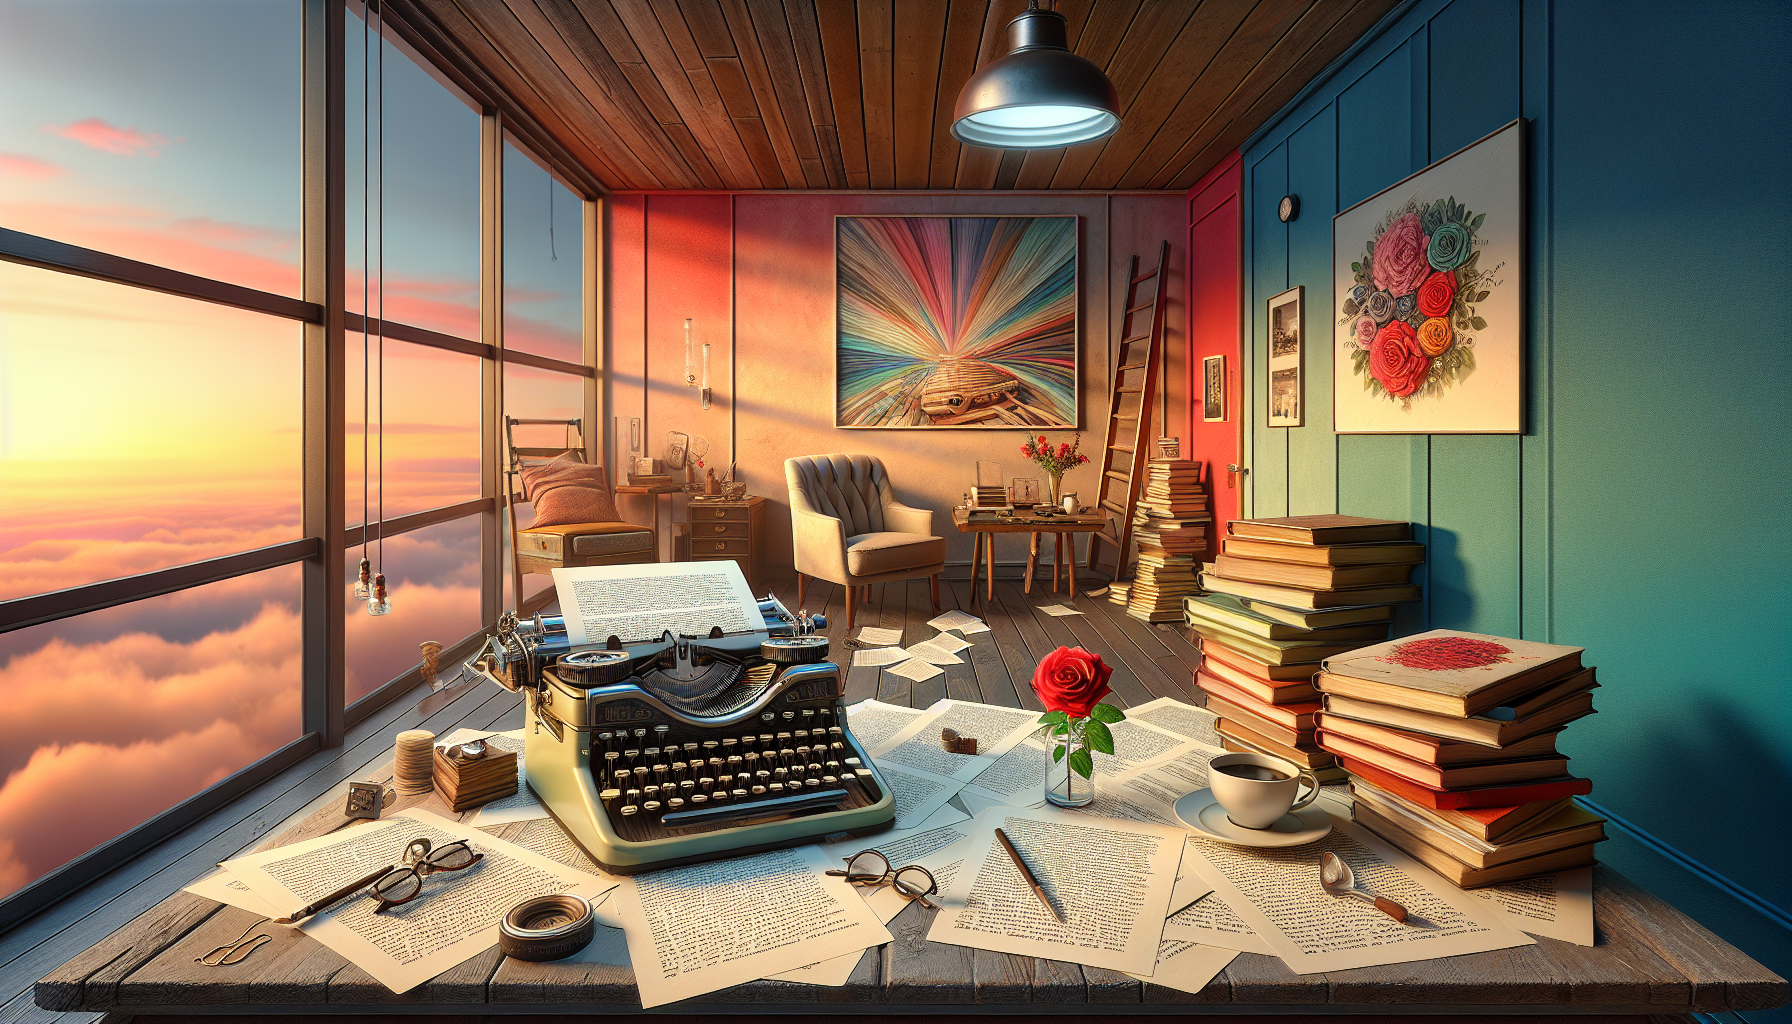 An artist's studio with an open vintage typewriter, sheets of paper scattered around, each filled with snippets of romantic dialogues. Soft lighting highlights a stack of classic love story novels, a